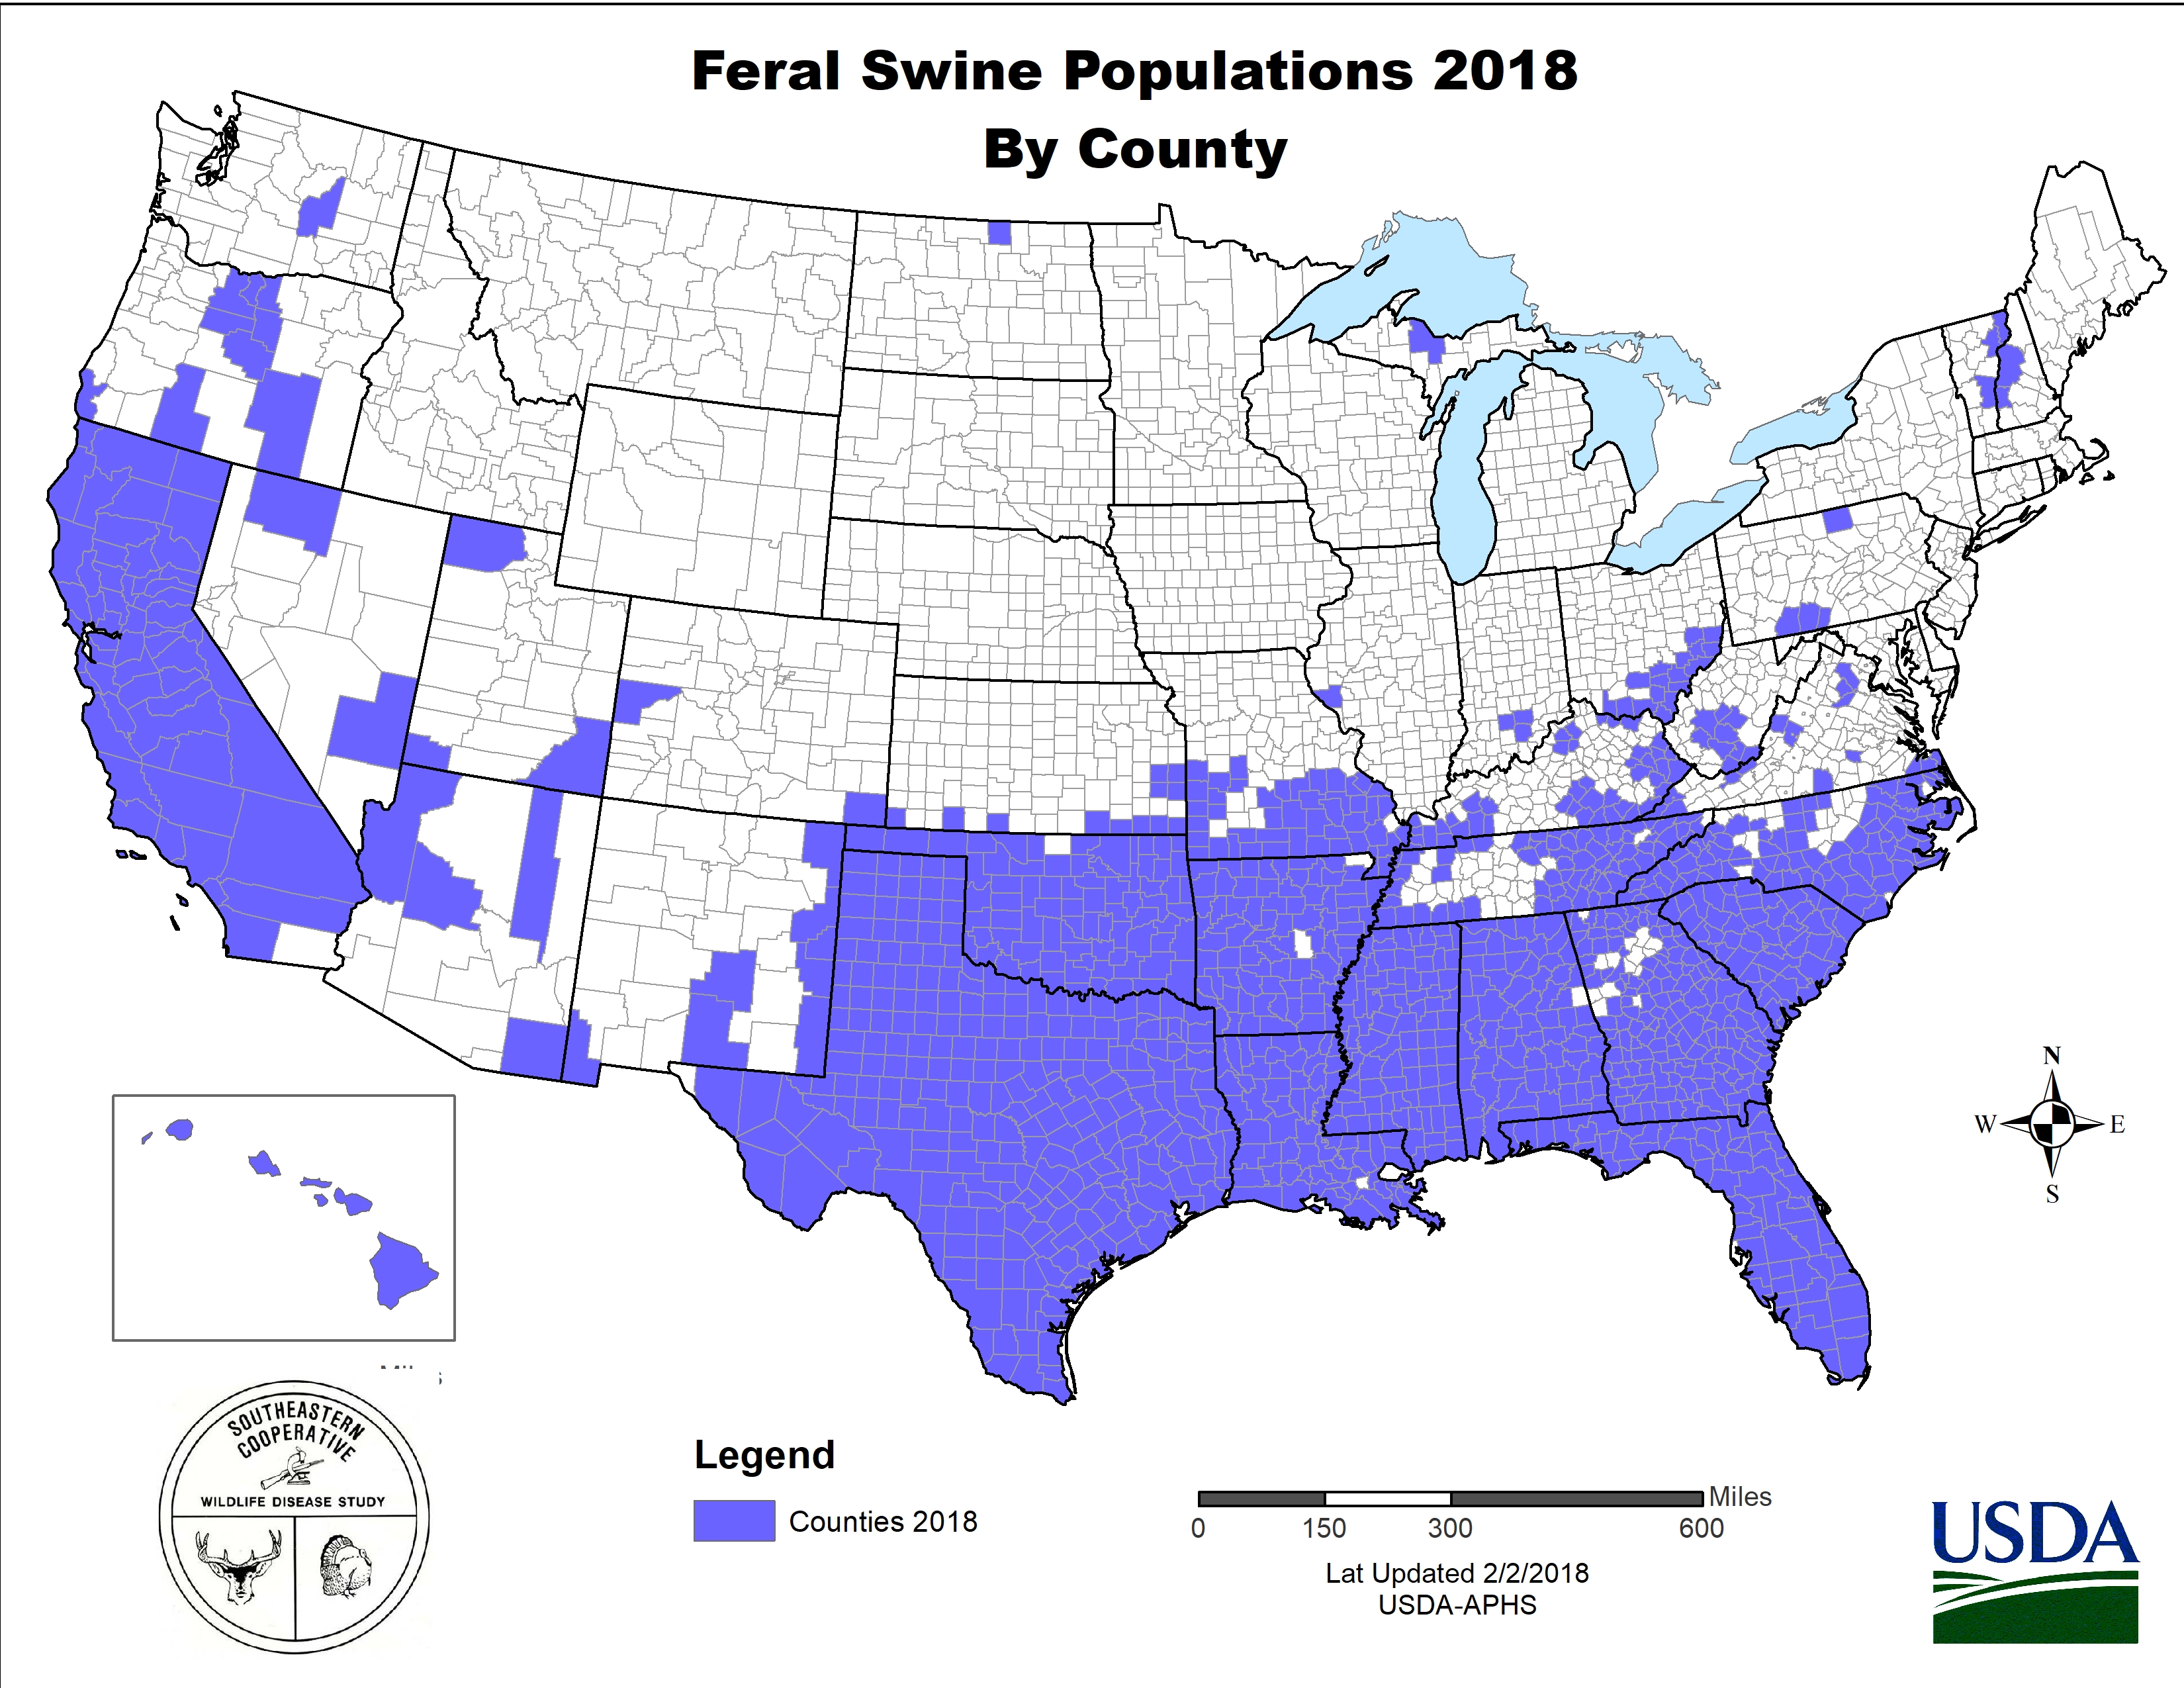 The USDA’s map of feral swine in the US in 2018